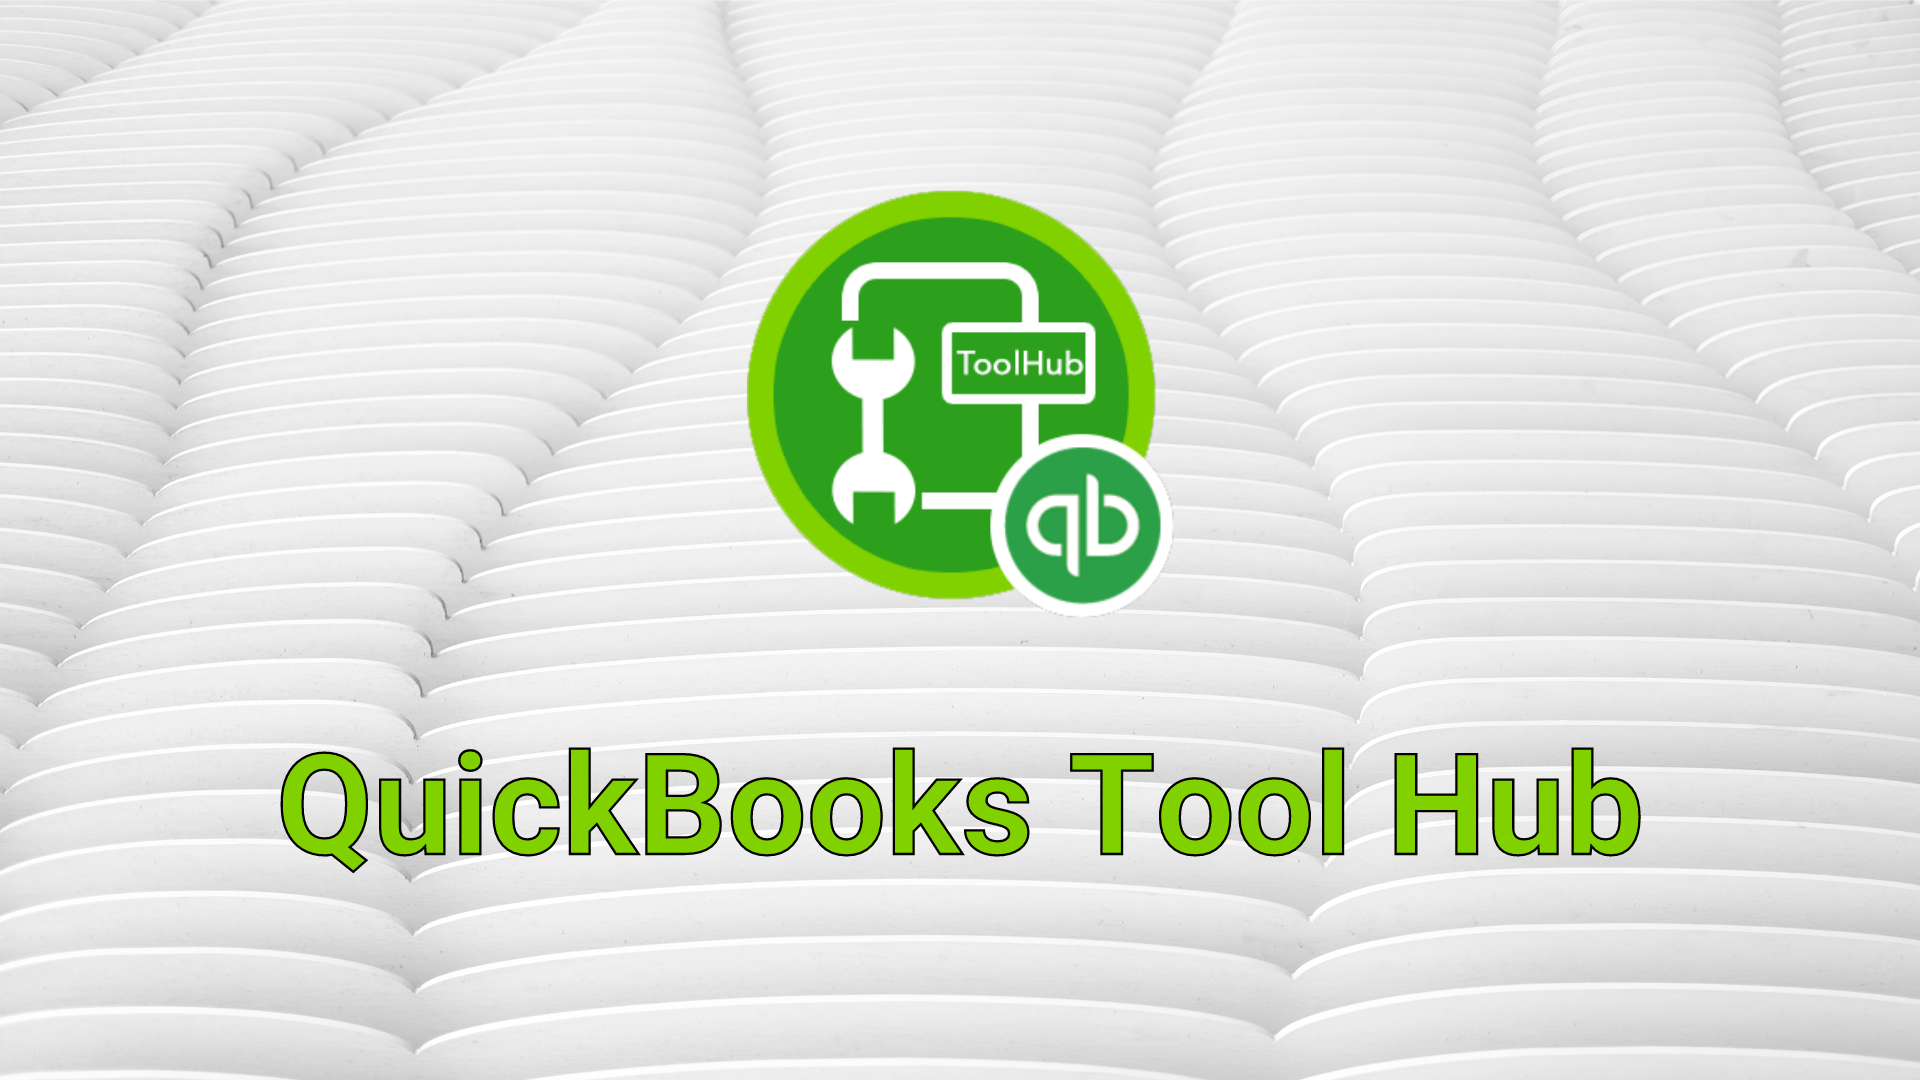 QuickBooks Tool Hub Download, Install, How to Use